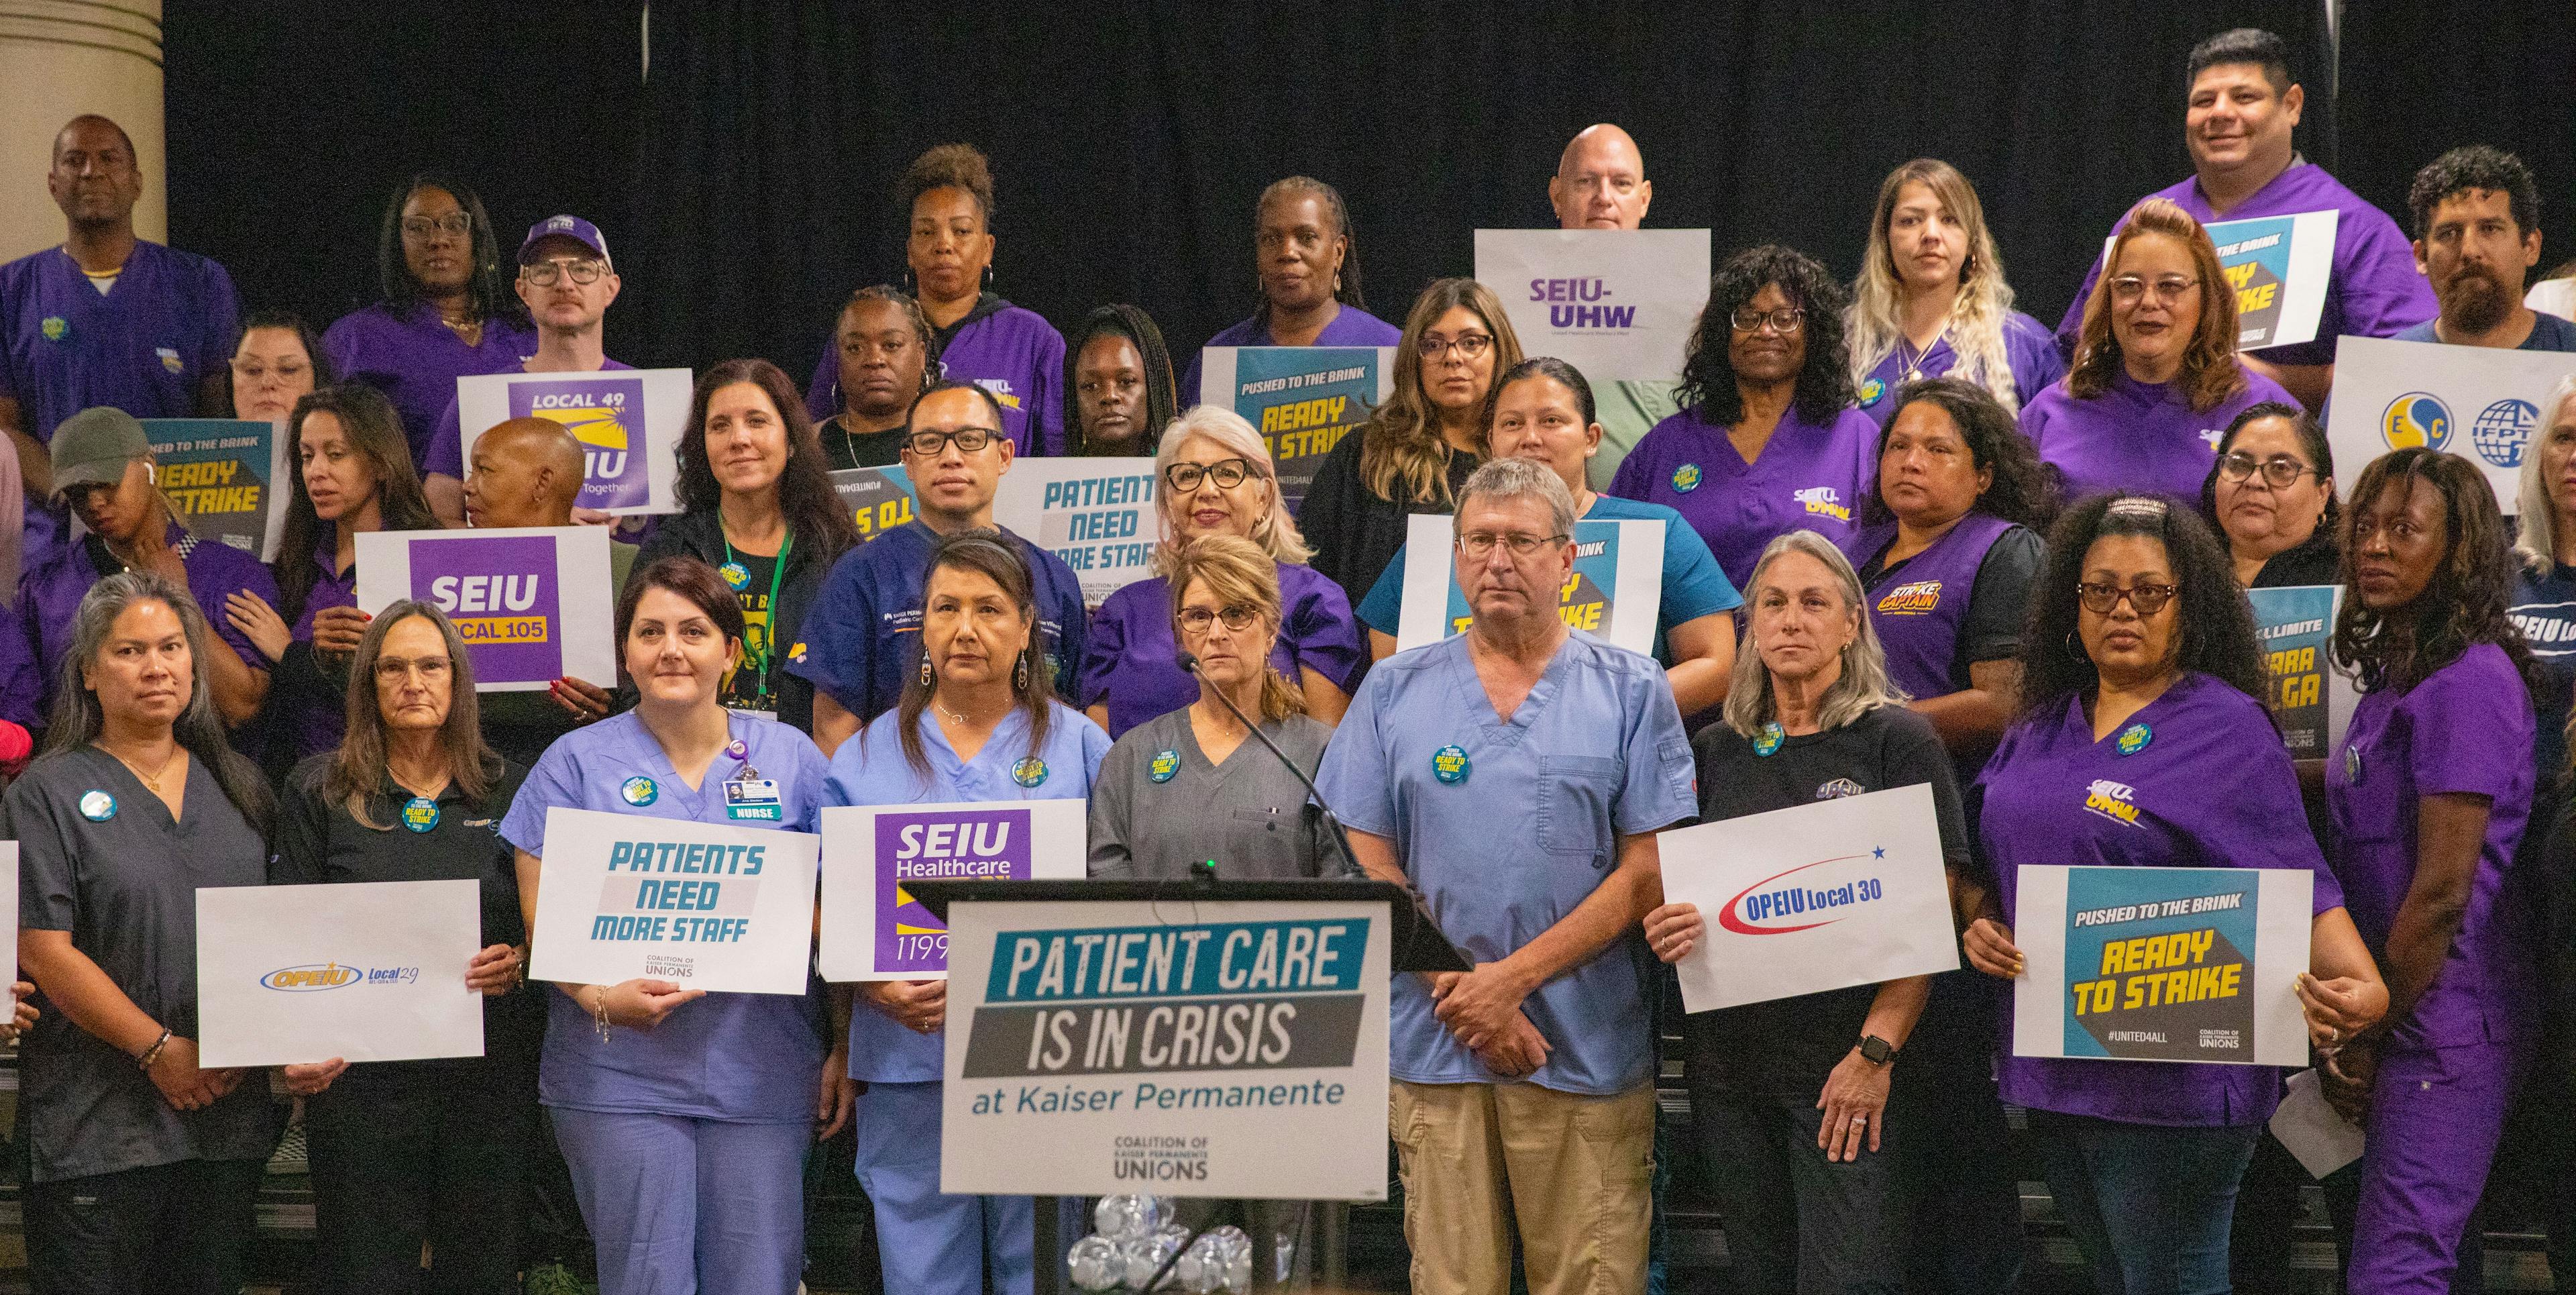 Tens of thousands of Kaiser Permanente union workers are slated to go on strike starting Wednesday, Oct. 4, unless there's a late deal. (Image credit: SEIU-HUW) 